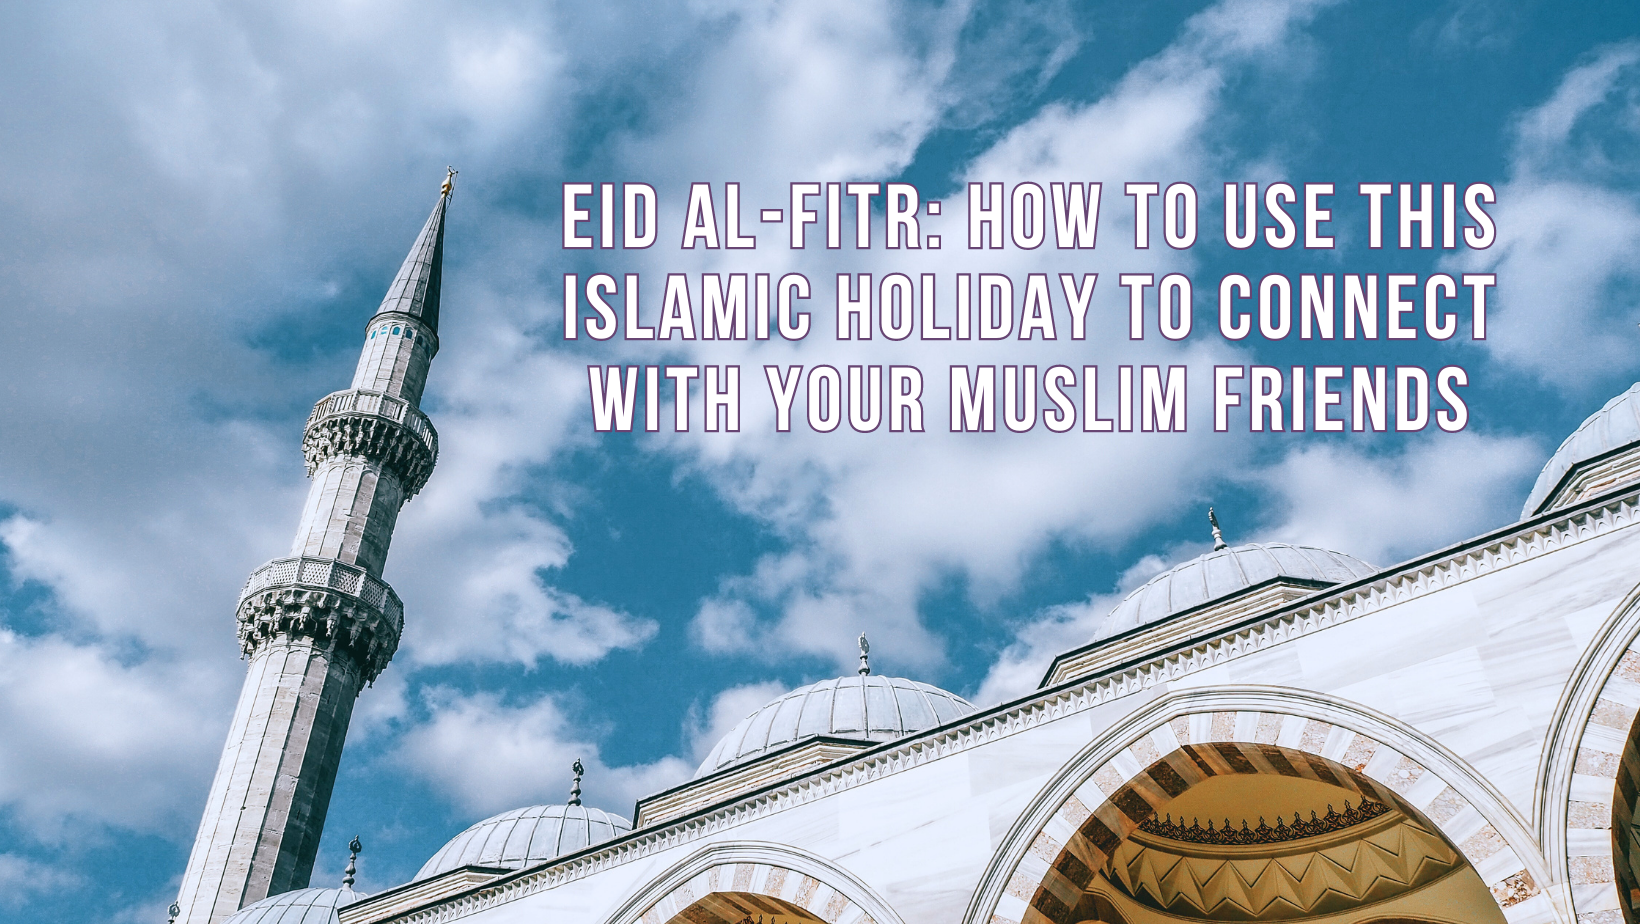 Eid al-Fitr: How to use this Islamic holiday to connect with your Muslim friends